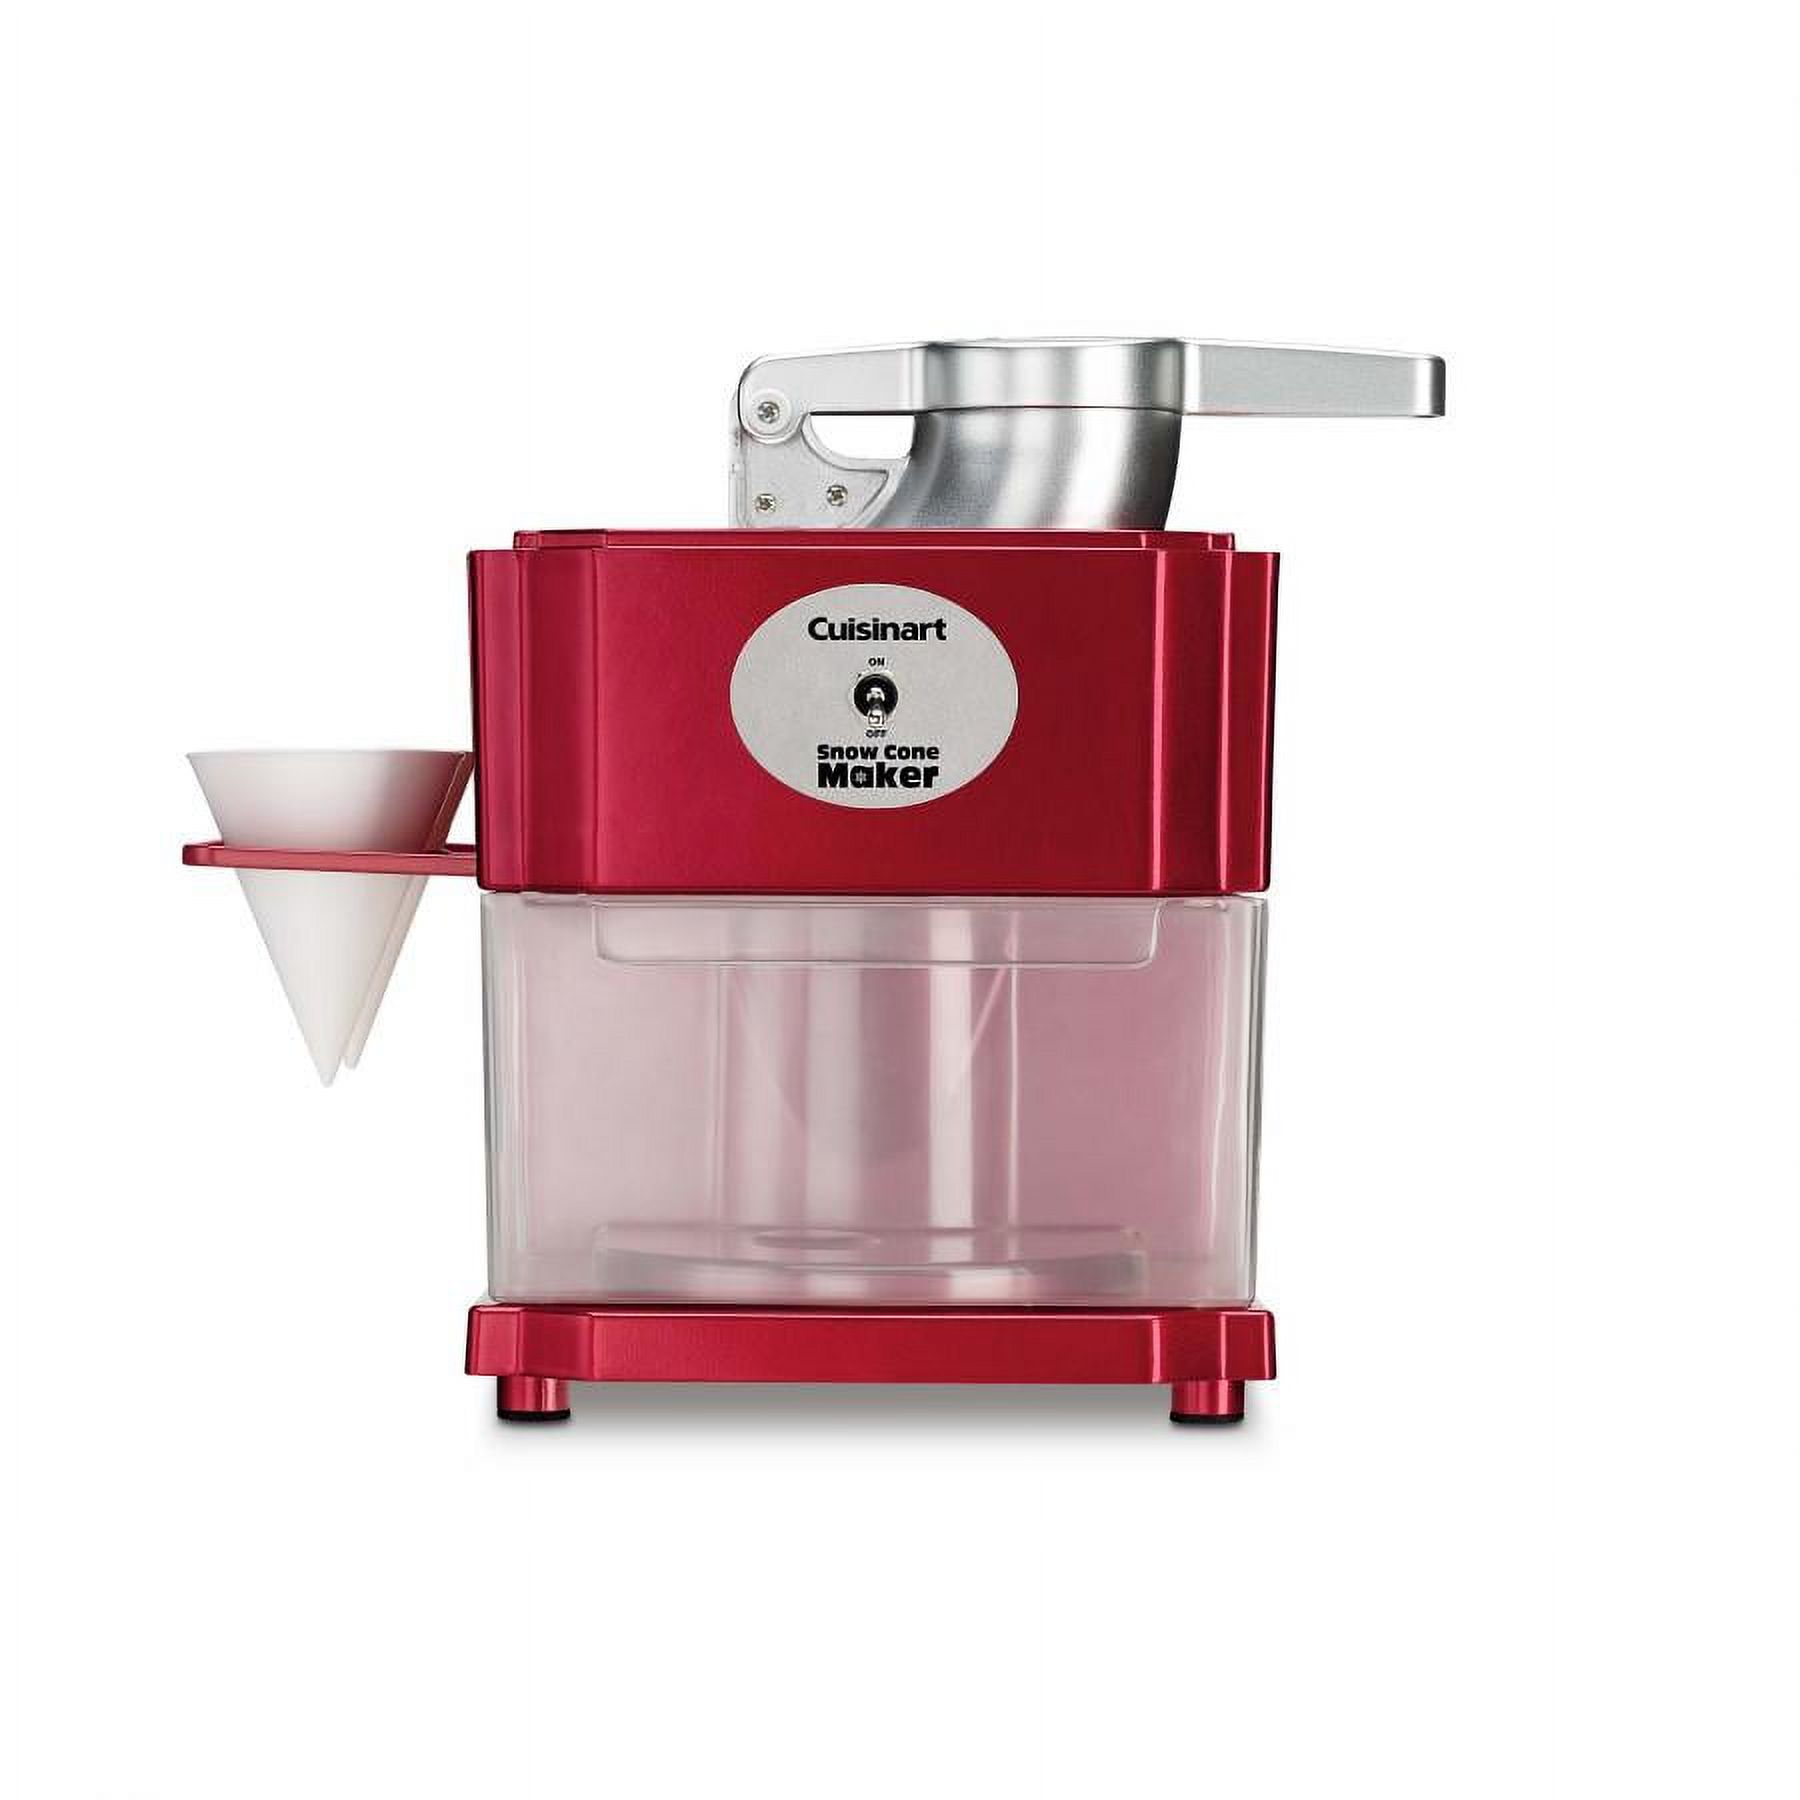 Cuisinart Specialty Appliances Snow Cone Maker - image 2 of 2